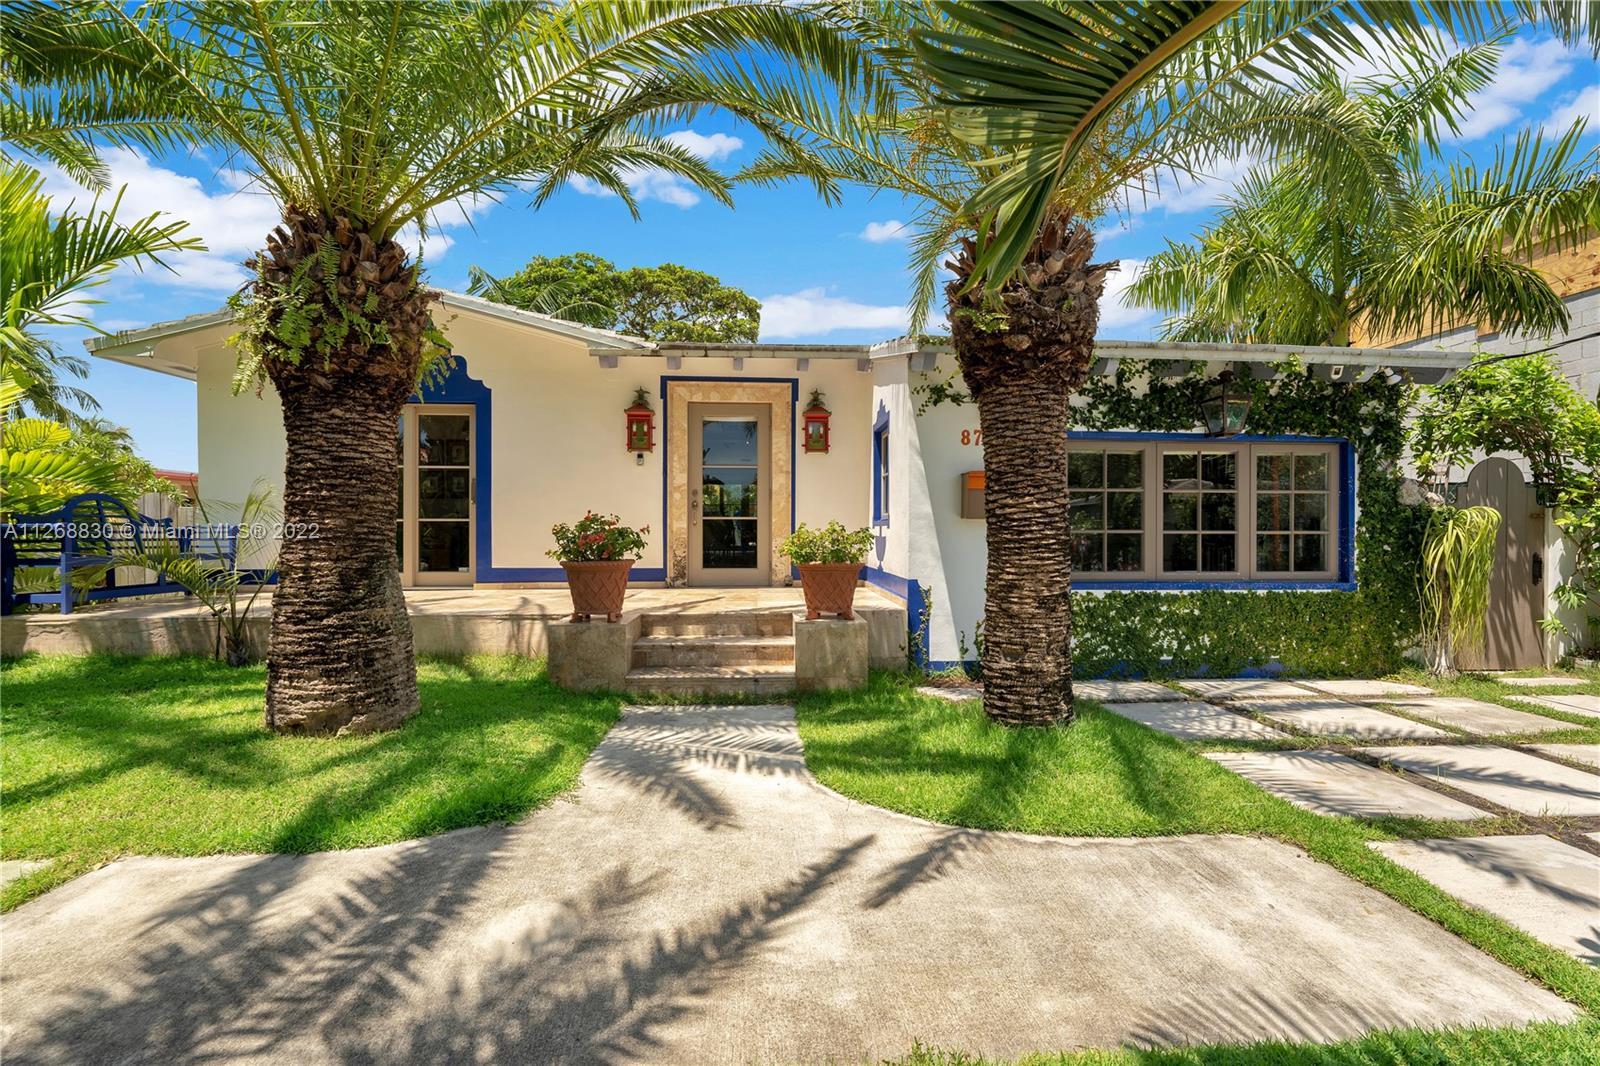 Come see this stunning estate in the heart of Surfside. If you’re looking for a property that’s walk